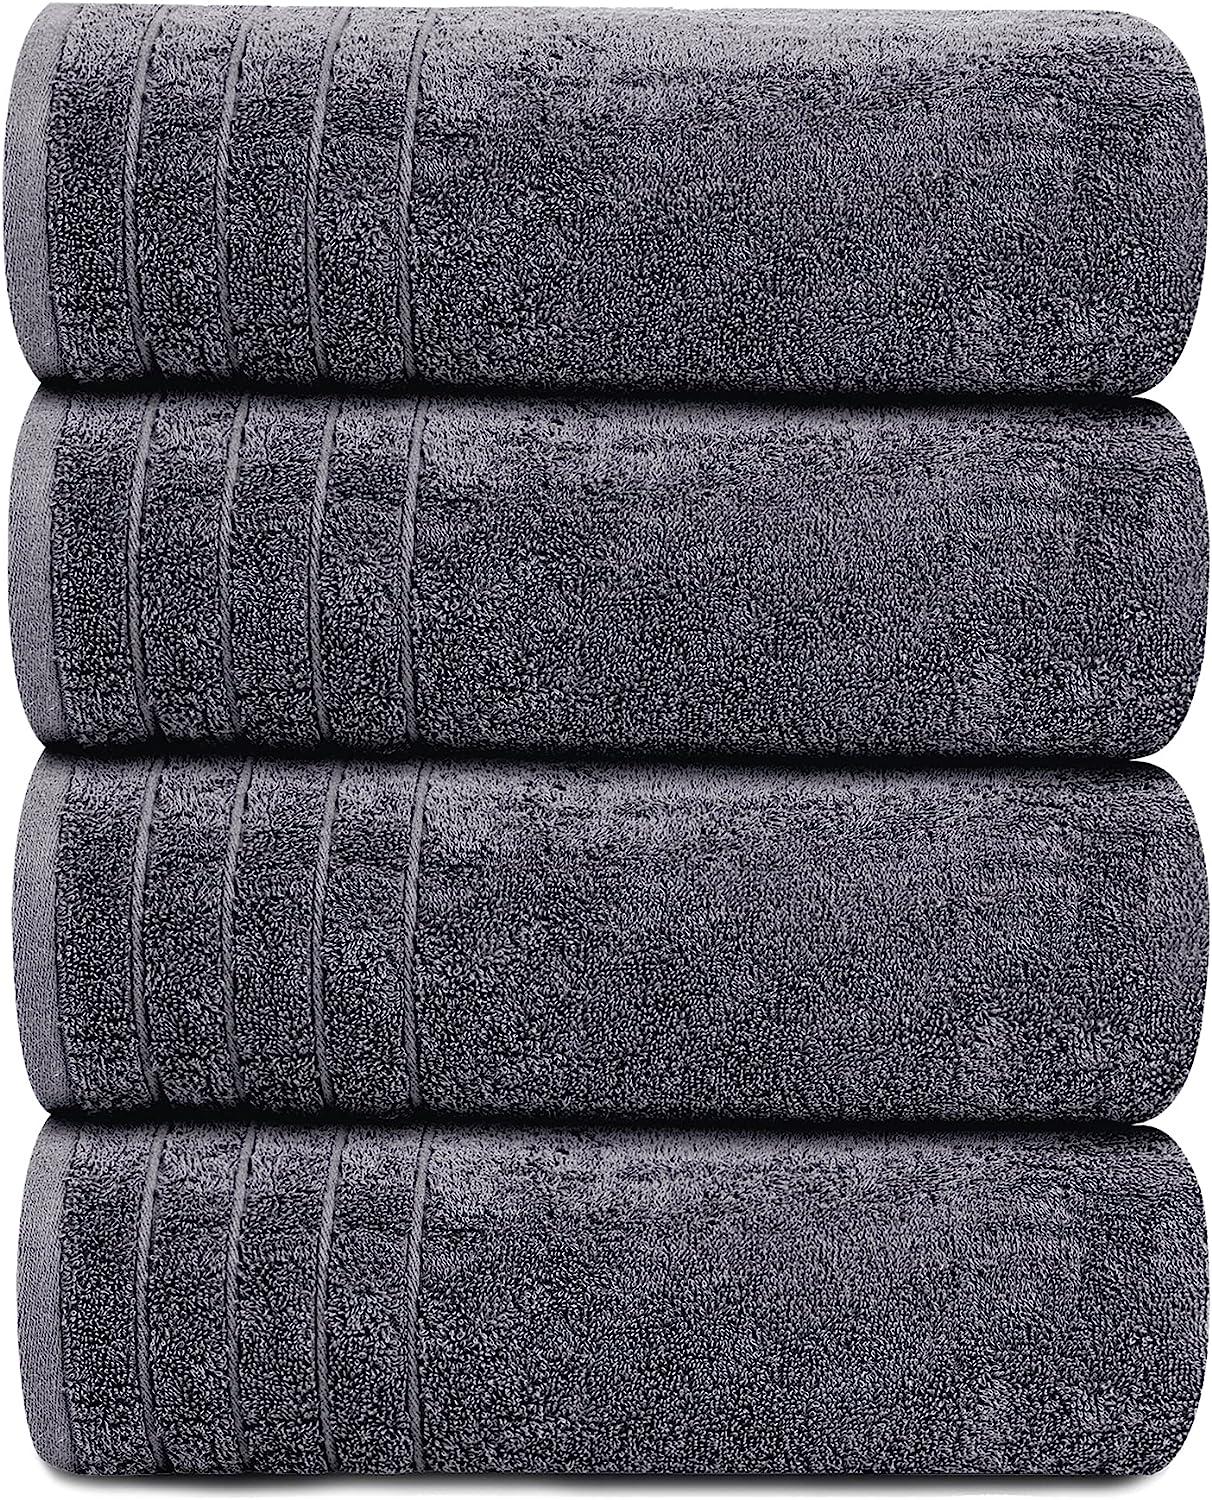 Tens Towels Large Bath Towels, 100% Cotton Towels, 30 x 60 Inches, Extra  Large, Lighter Weight & Super Absorbent, Quick Dry, Perfect Bathroom Towels